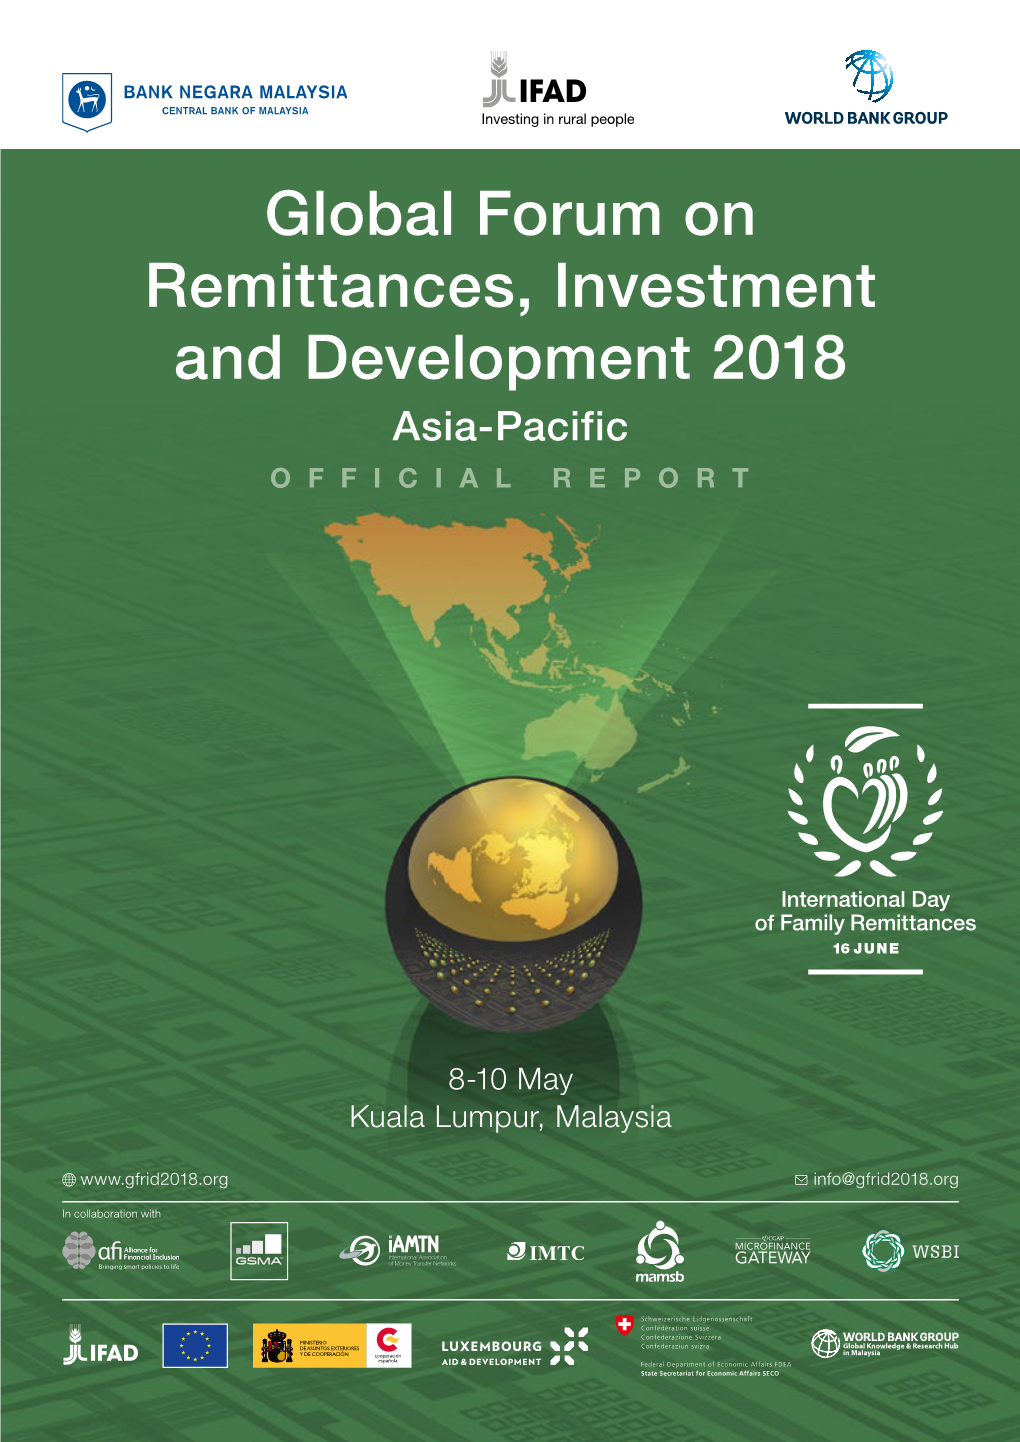 Global Forum on Remittances, Investment and Development 2018 Asia-Pacific OFFICIAL REPORT